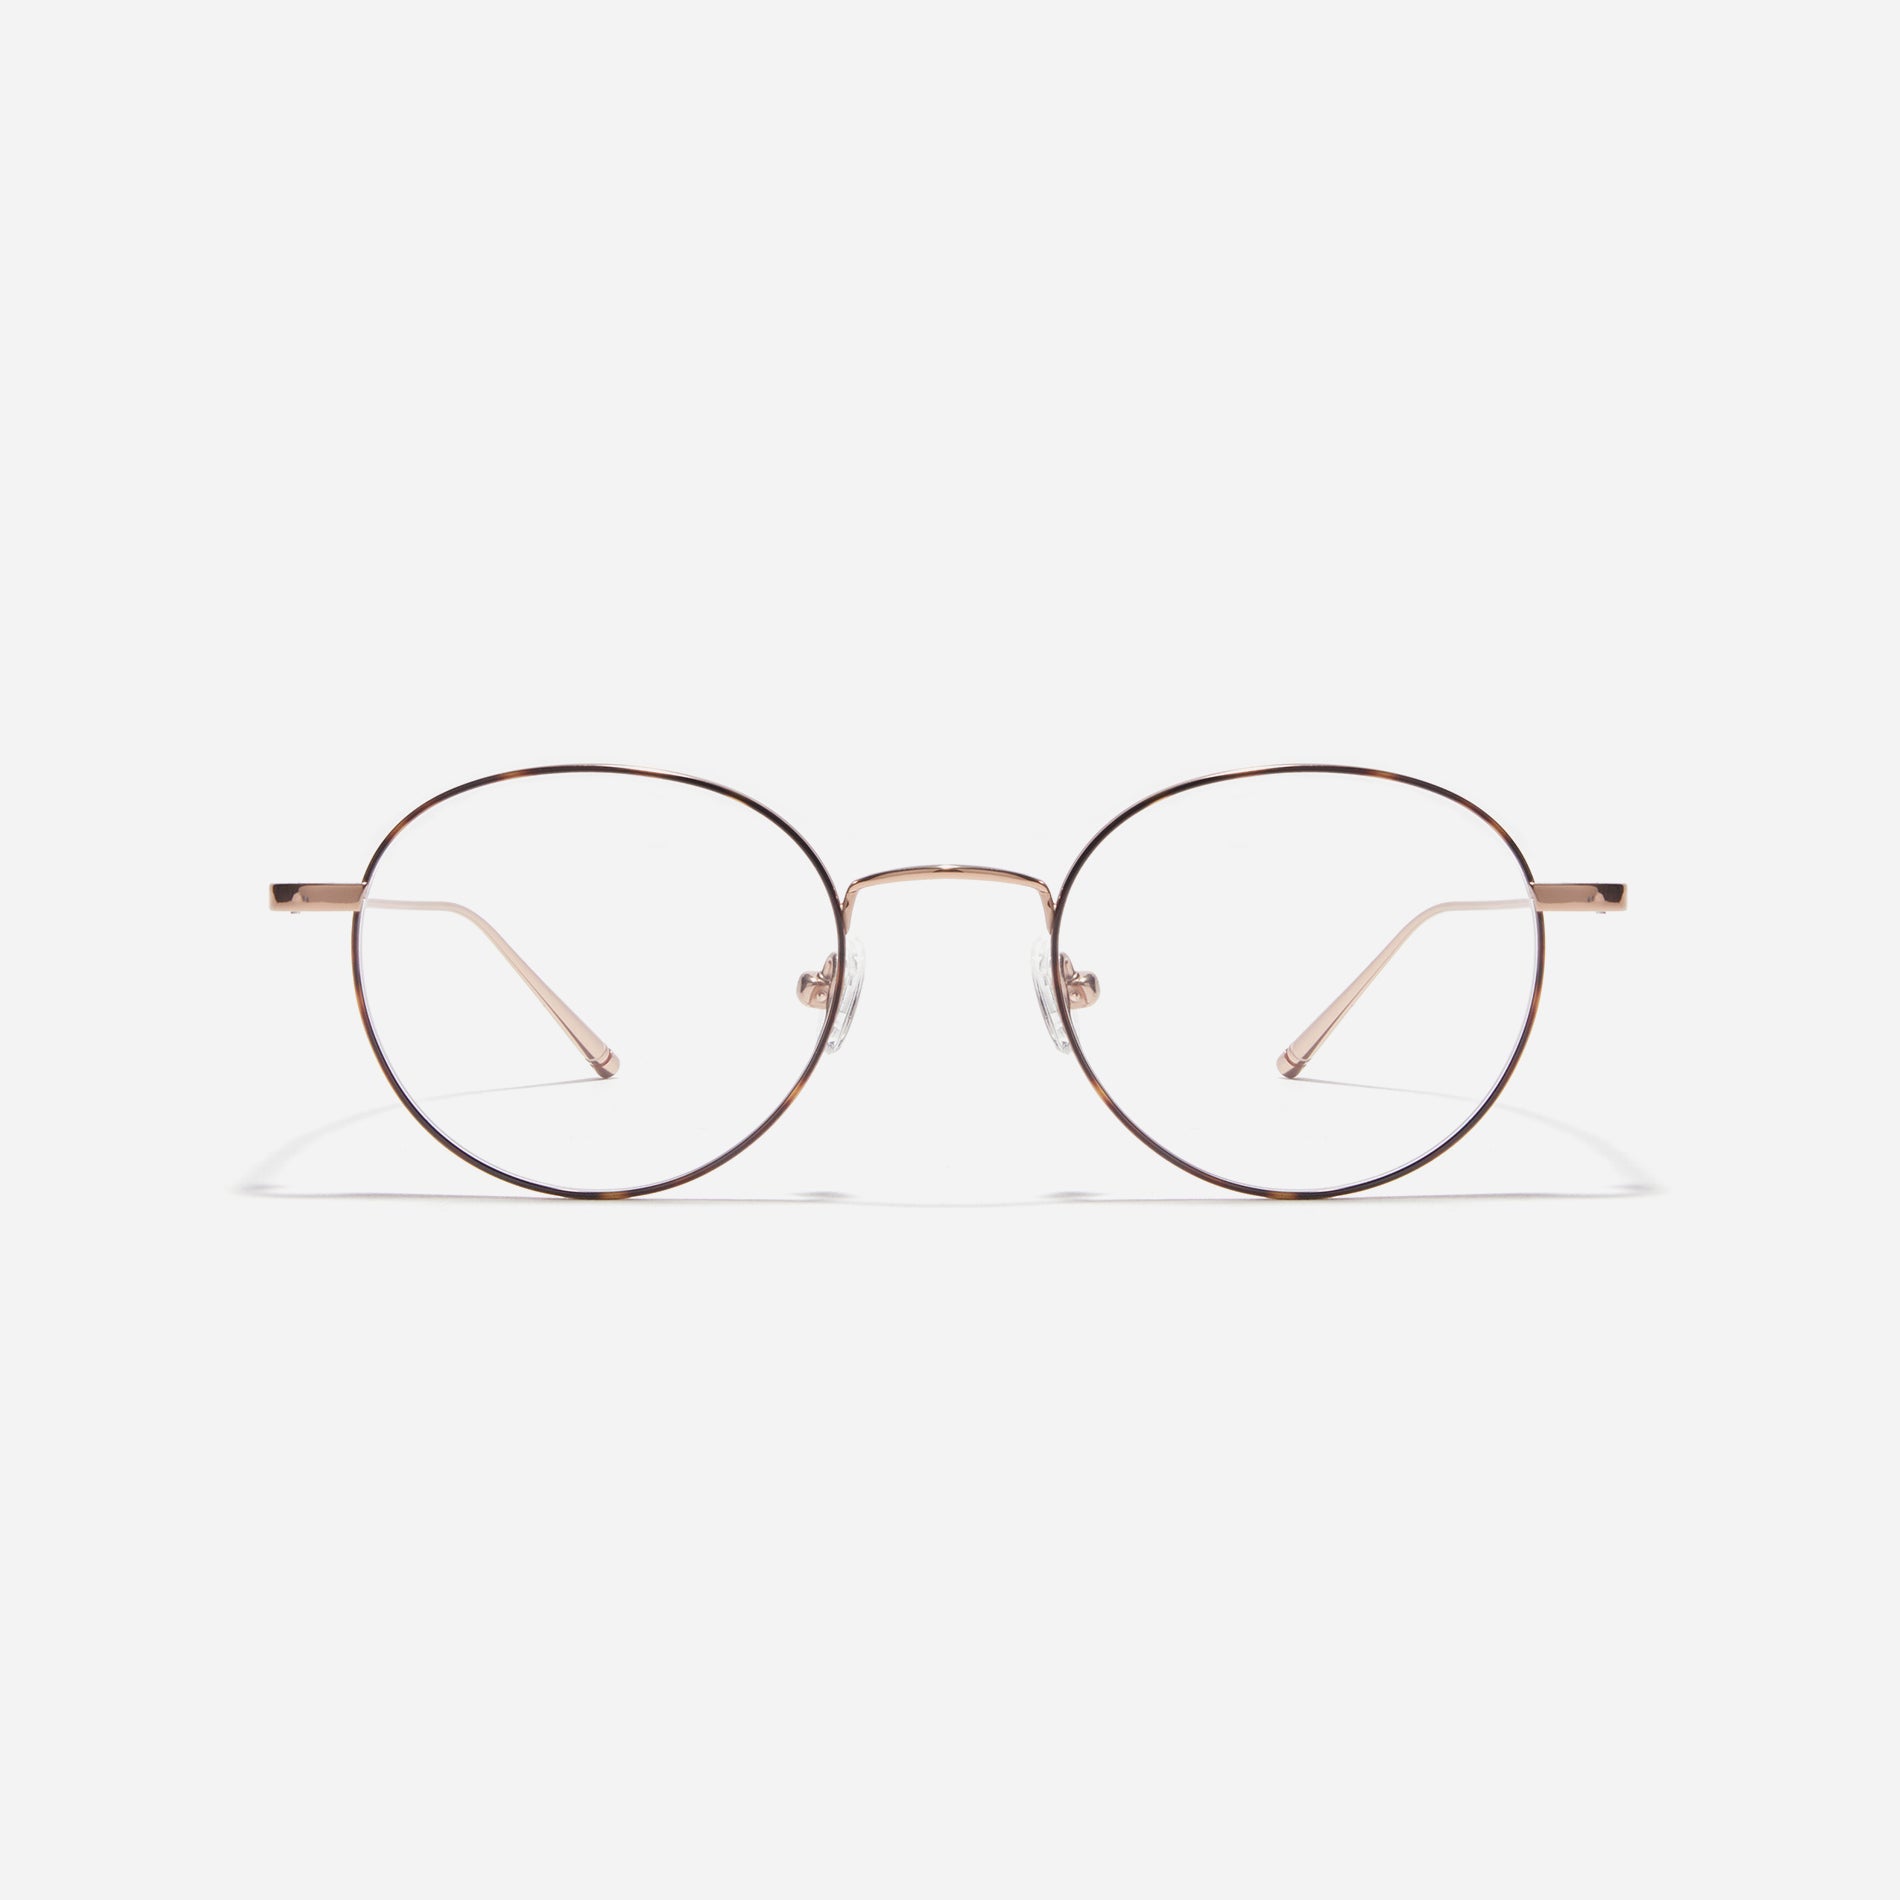 Round-shaped titanium eyeglasses inspired by the aesthetics of platform shoes. Their dual-rim structure effortlessly accommodates the use of thick lenses for higher prescriptions, while retro vibes shine through side color accents applied using epoxy techniques. 